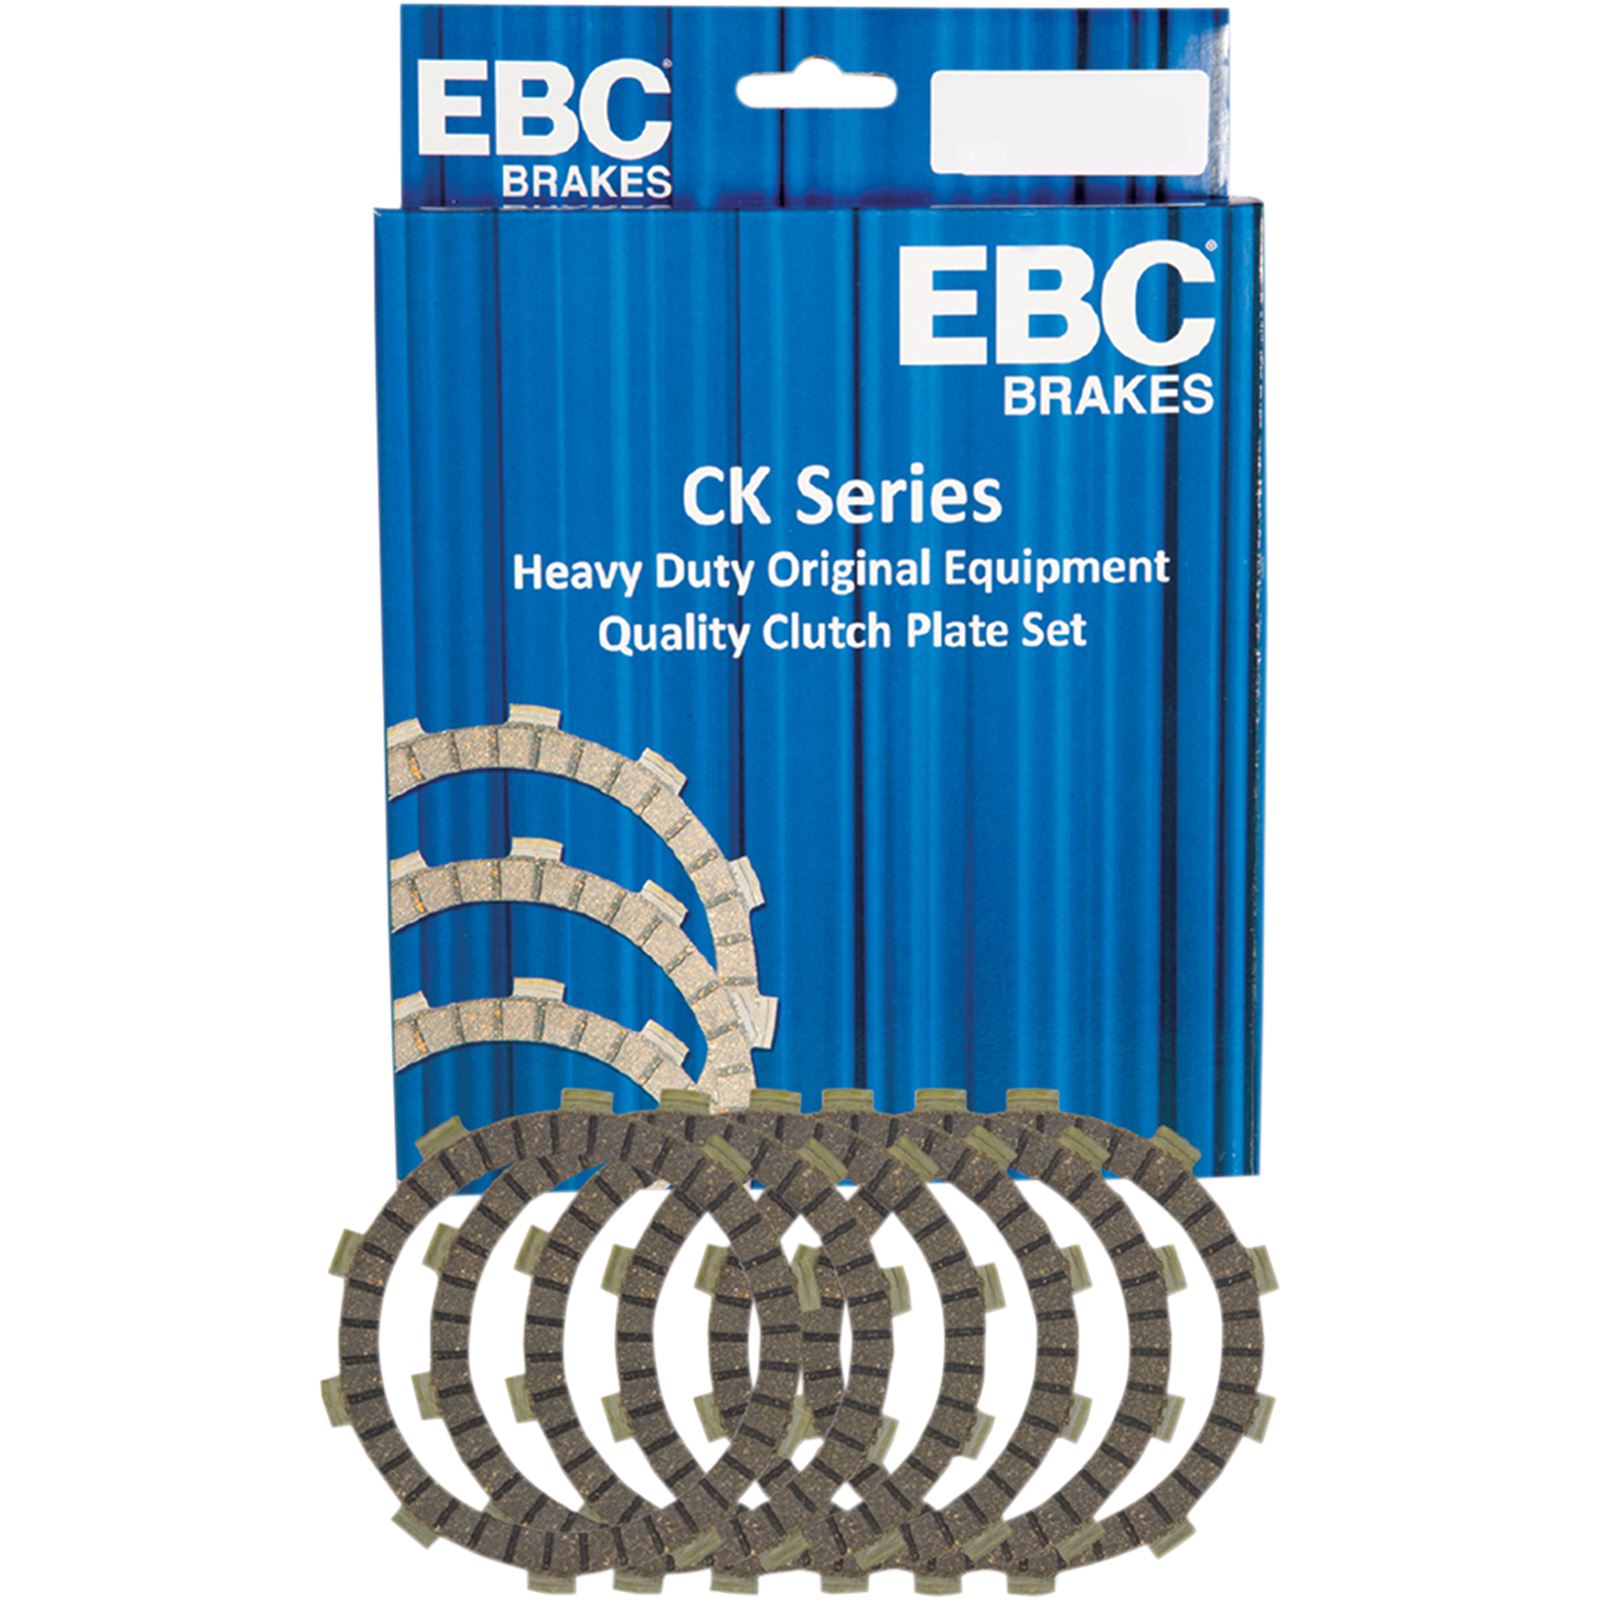 EBC Clutch Kit is at Motomentum at a great price! See our Free